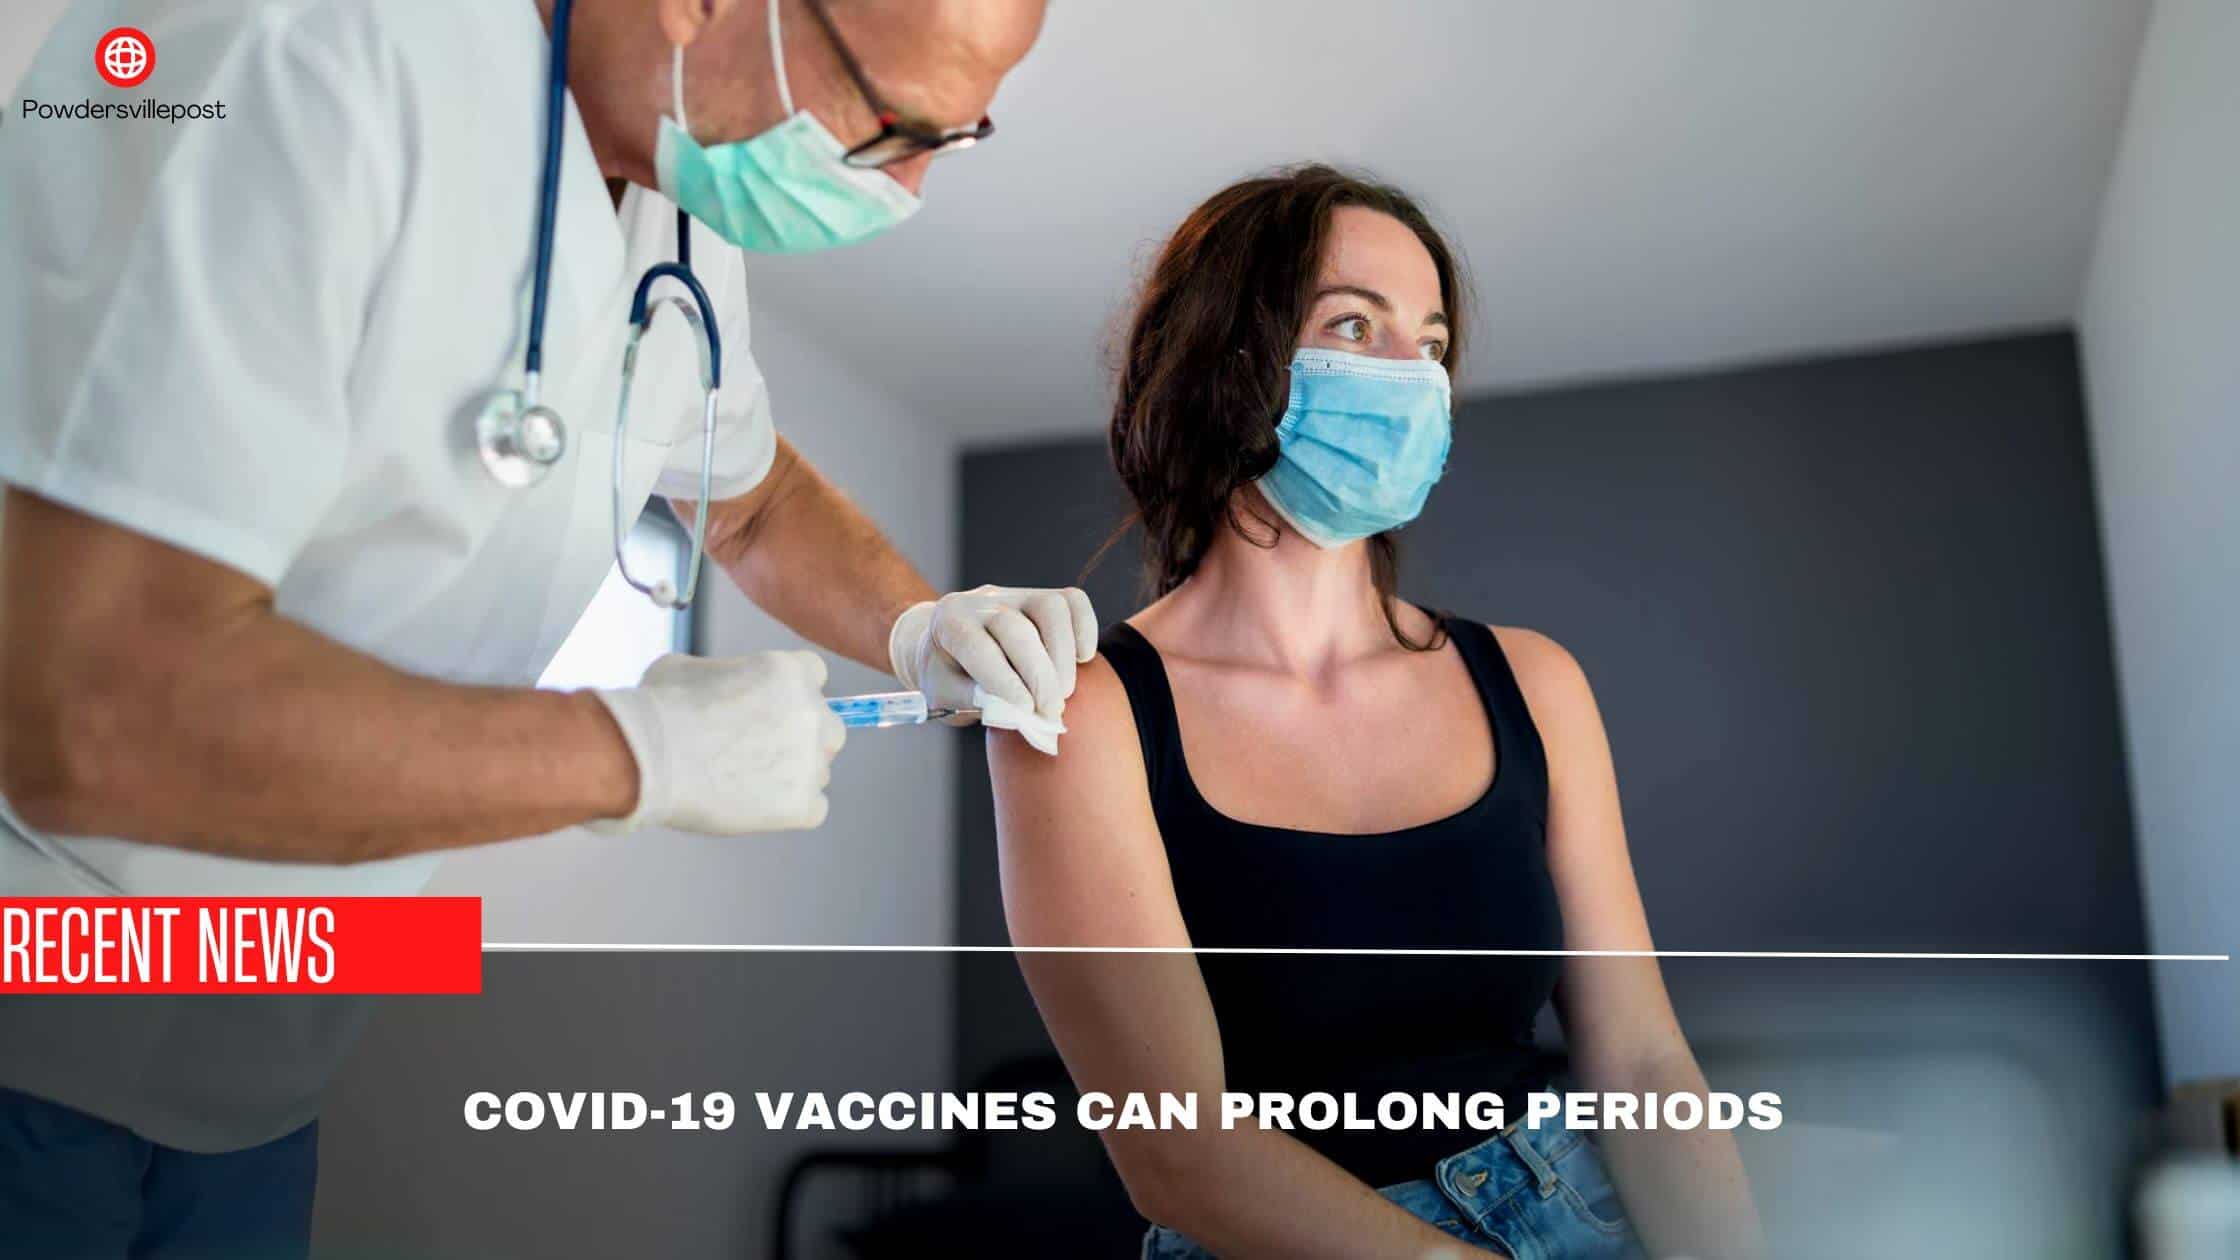 Covid-19 Vaccines Can Prolong Periods- Study Says